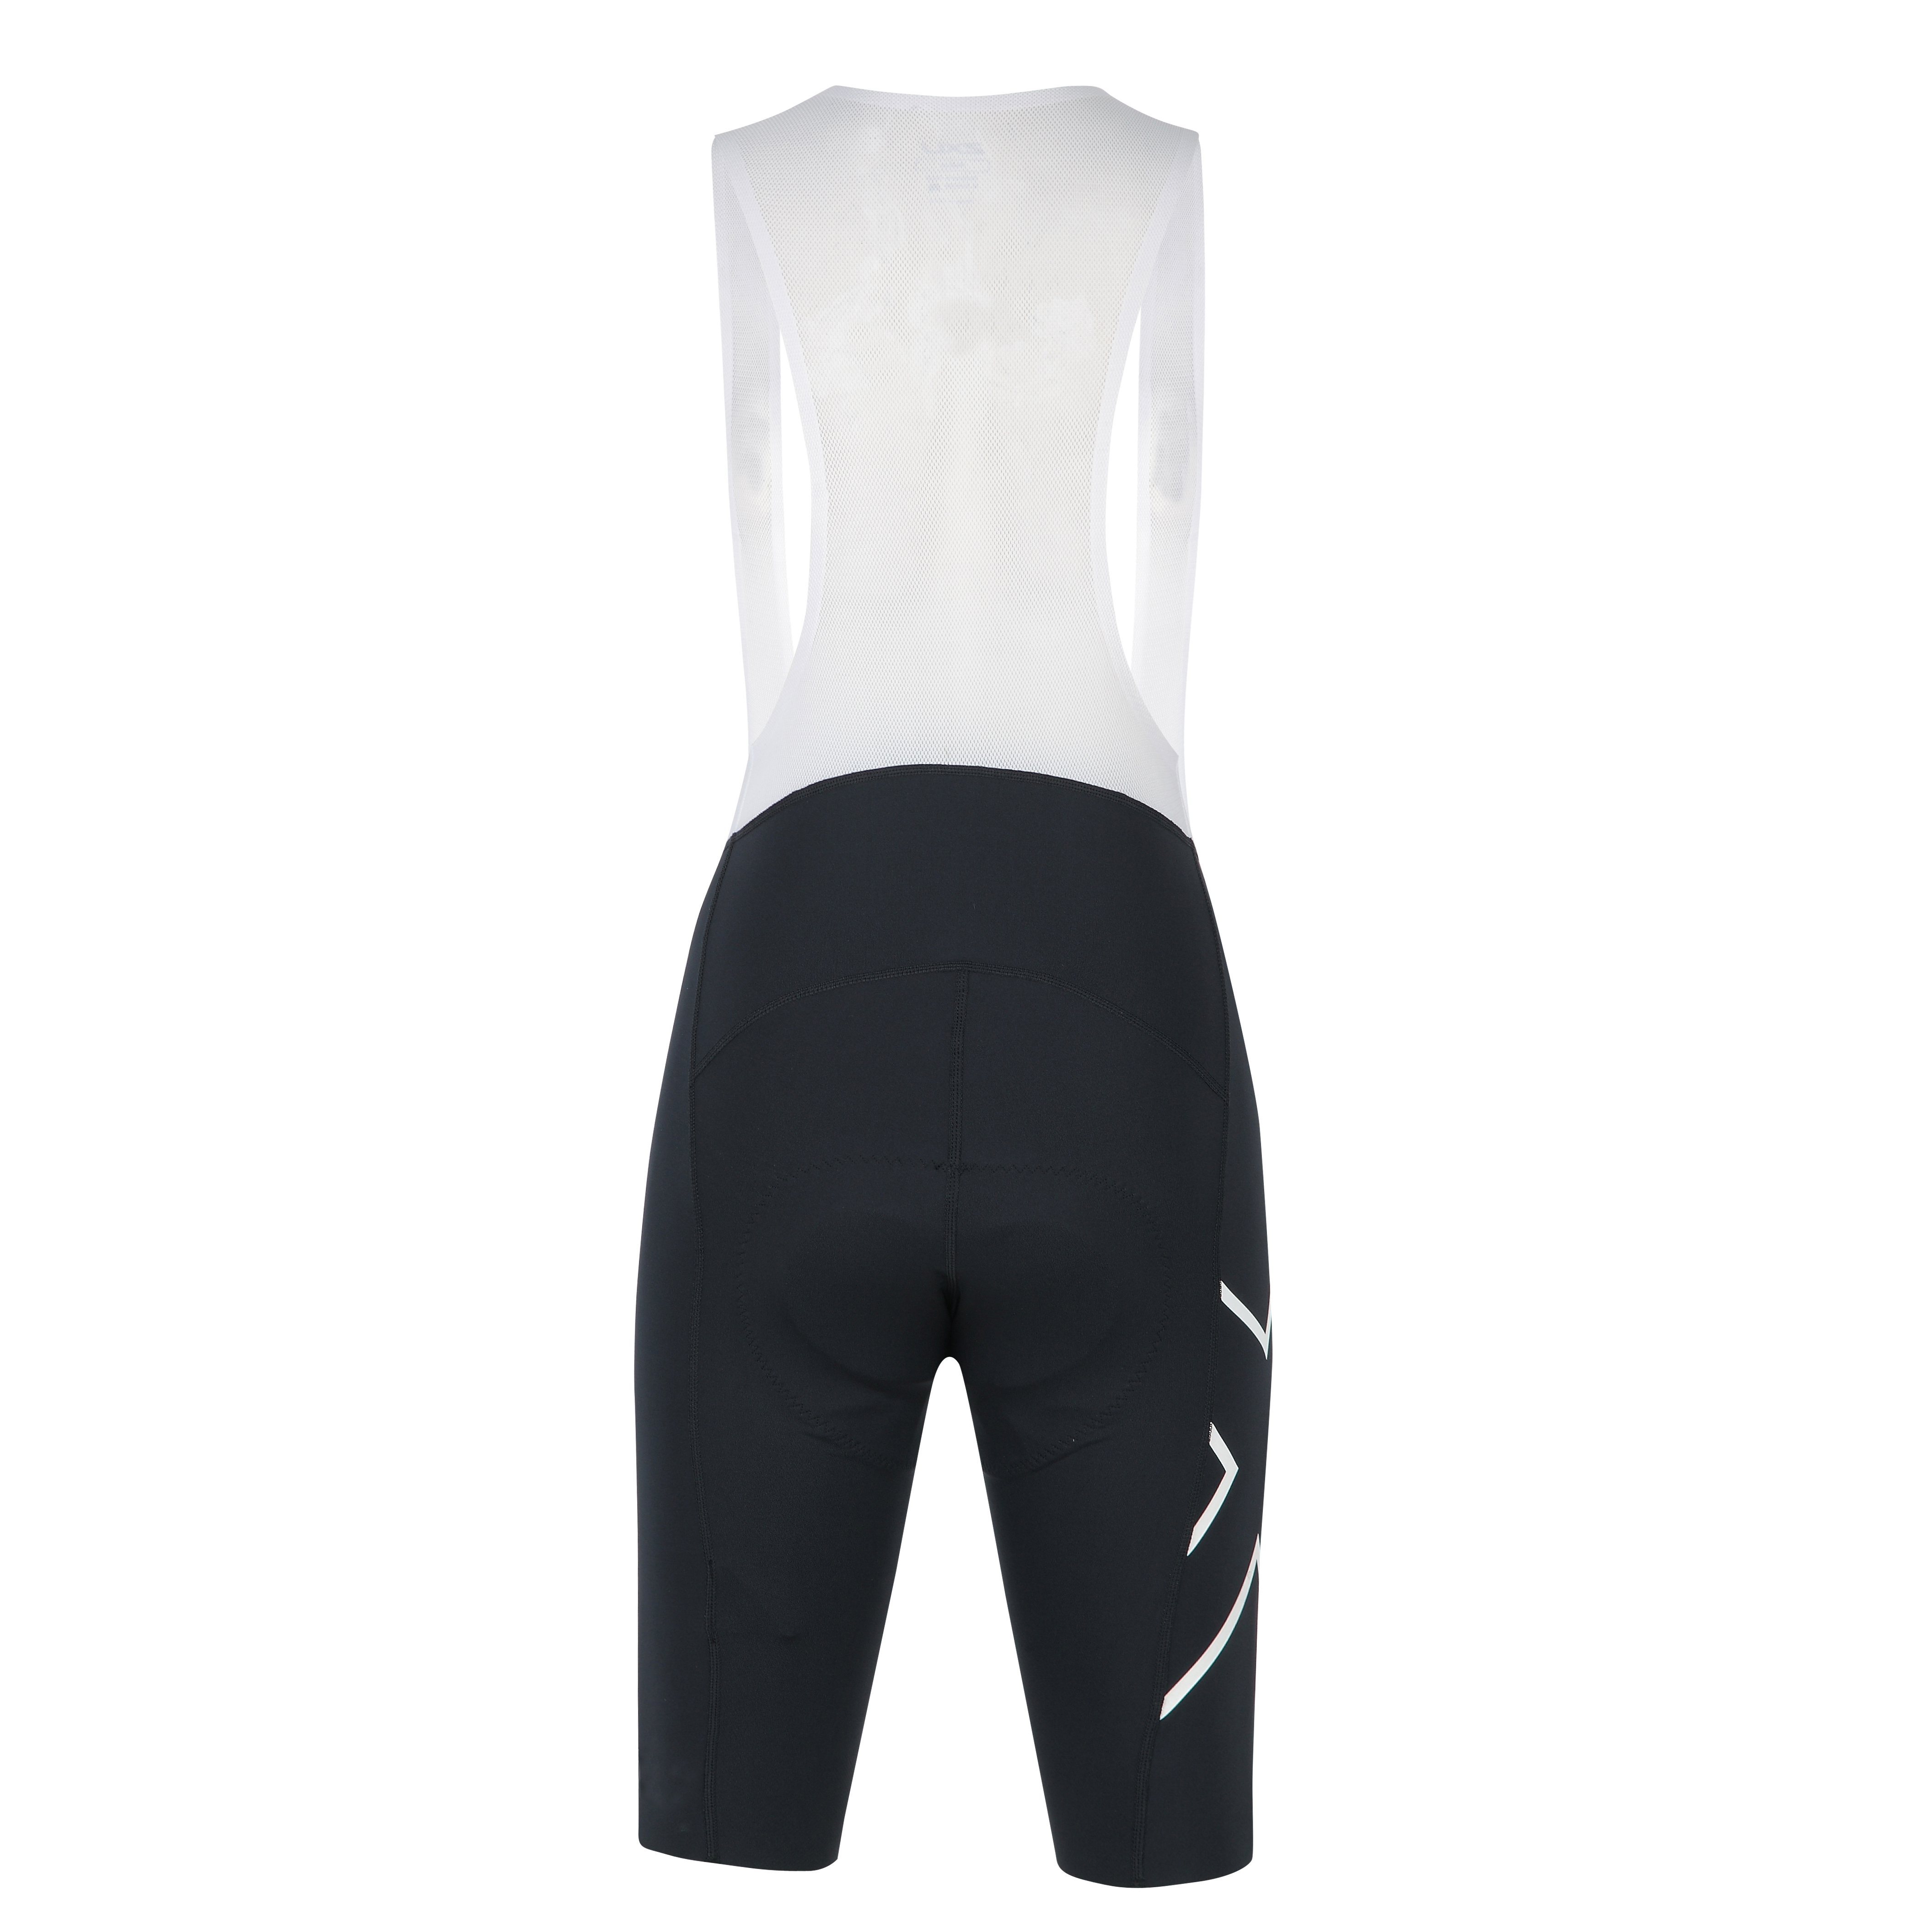 Men’s knitted bicycle Bib short with pad